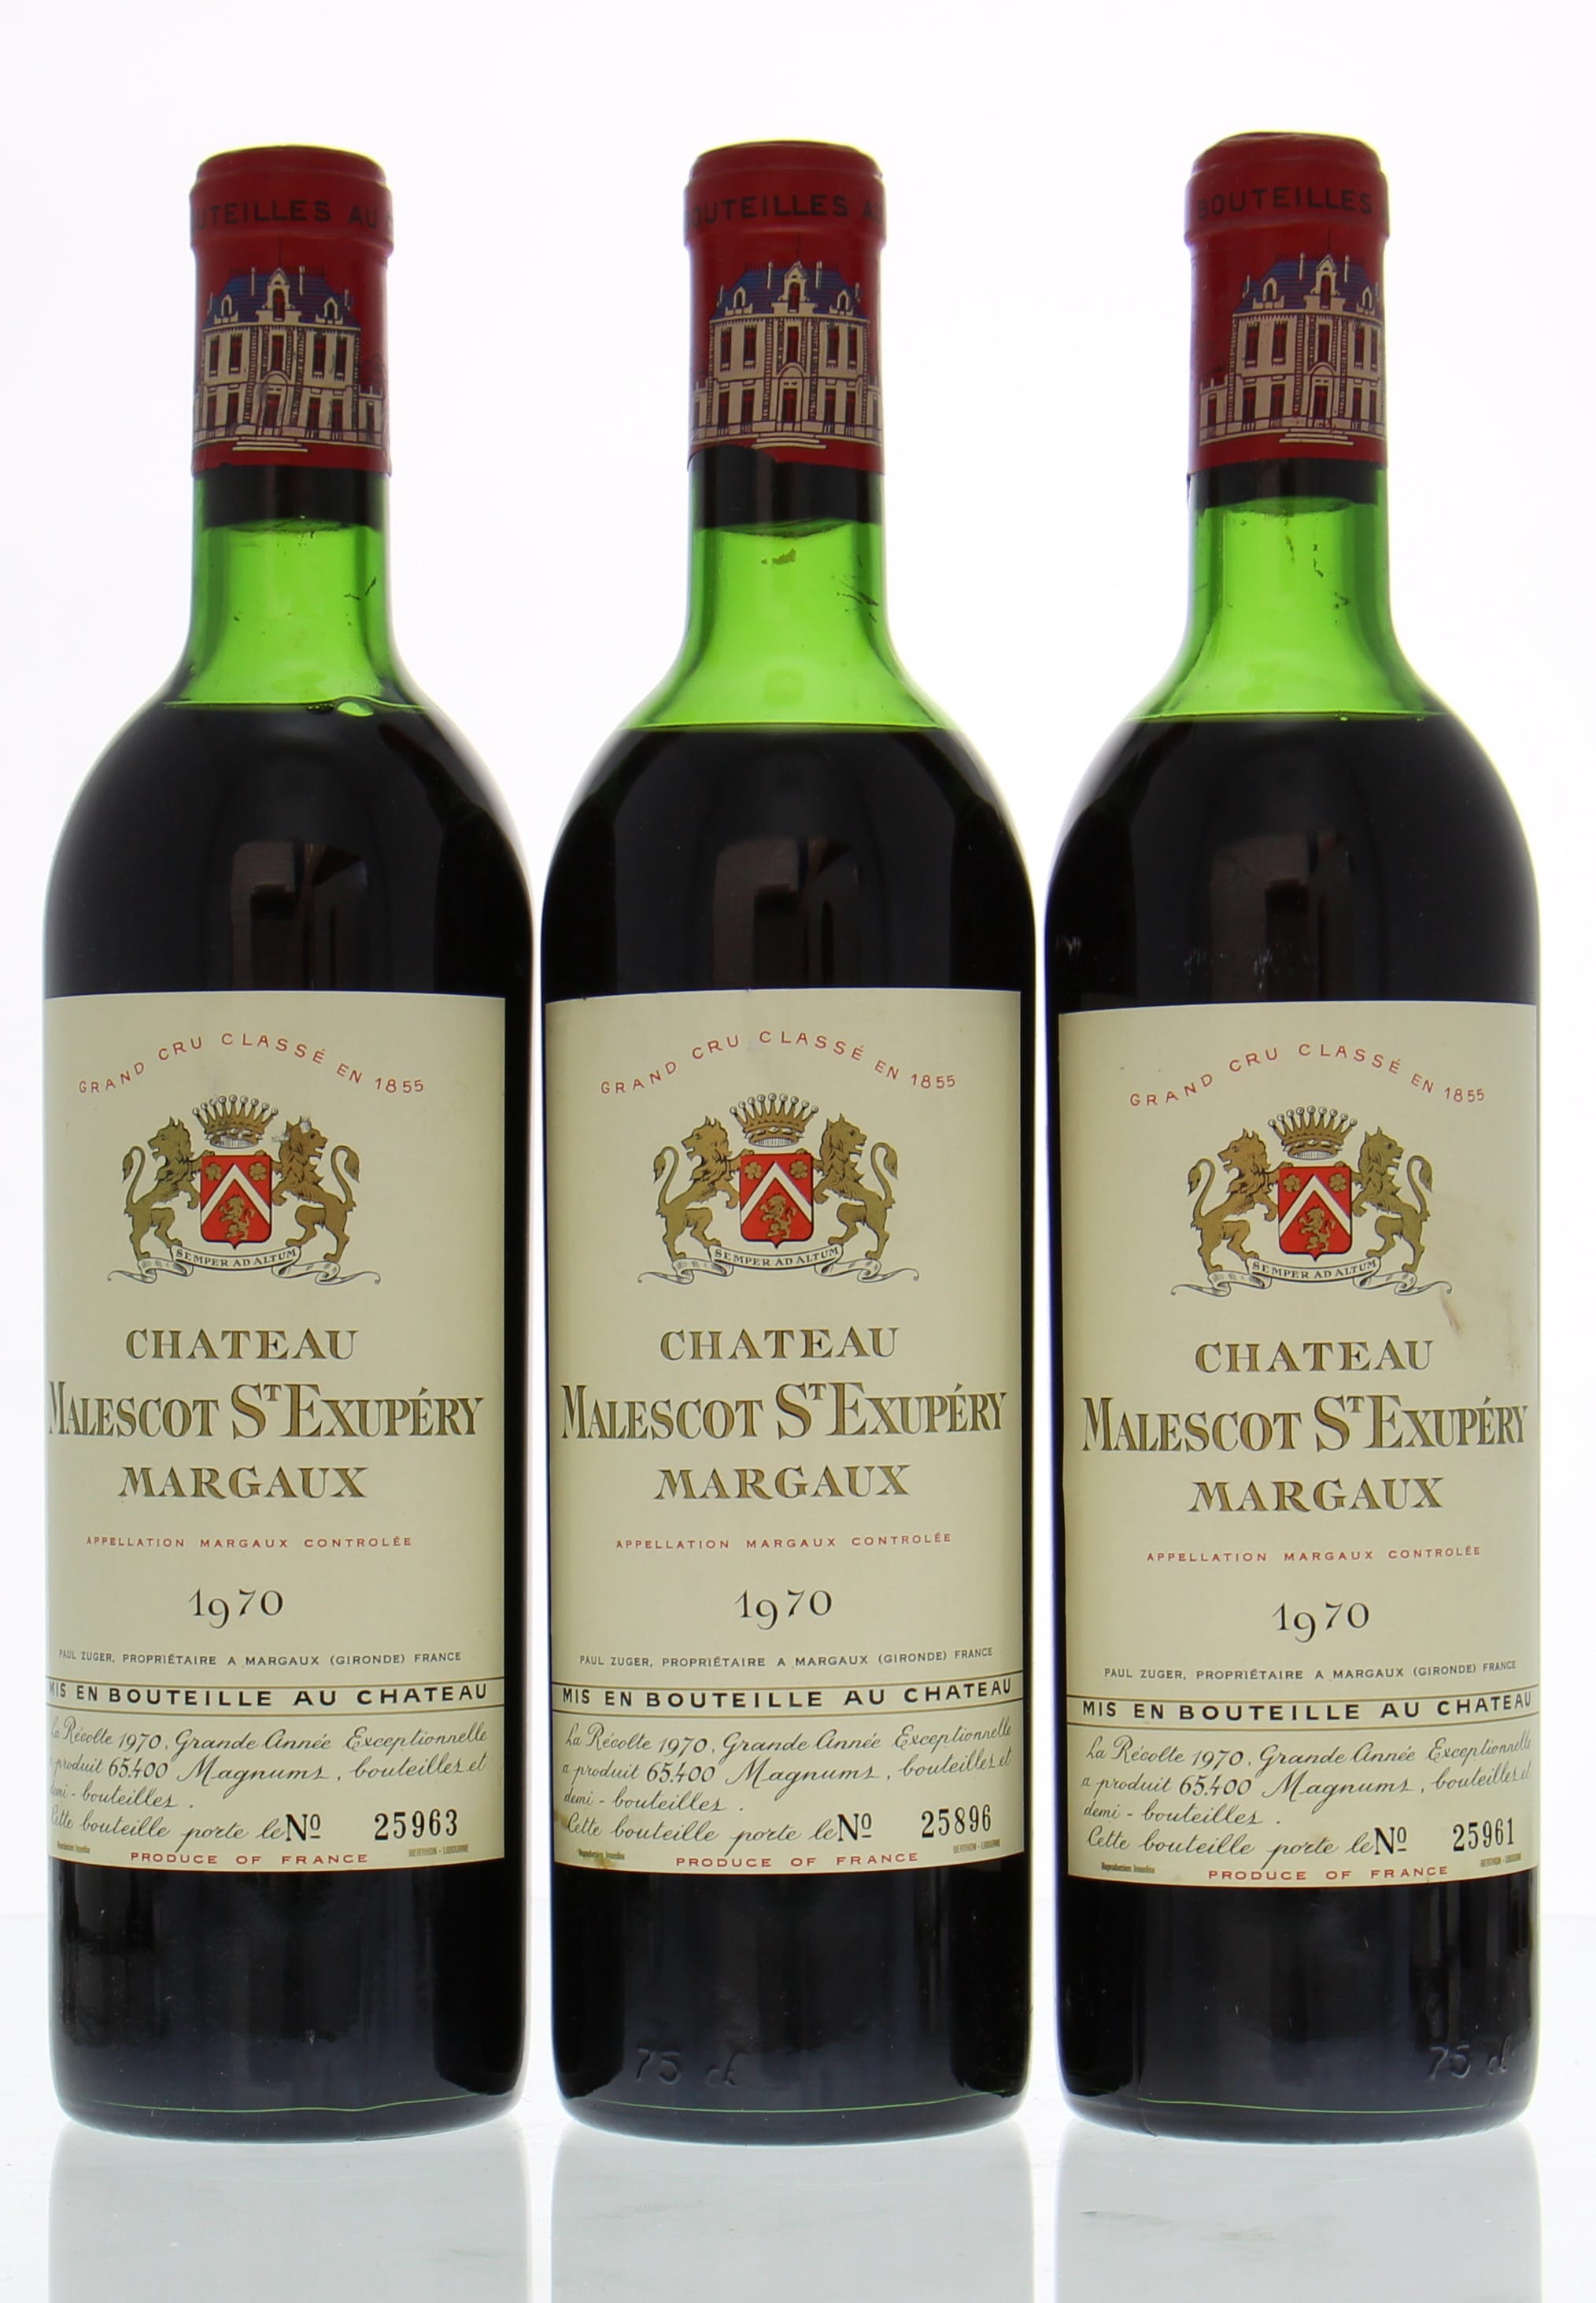 Chateau Malescot-St-Exupery - Chateau Malescot-St-Exupery 1970 High shoulder